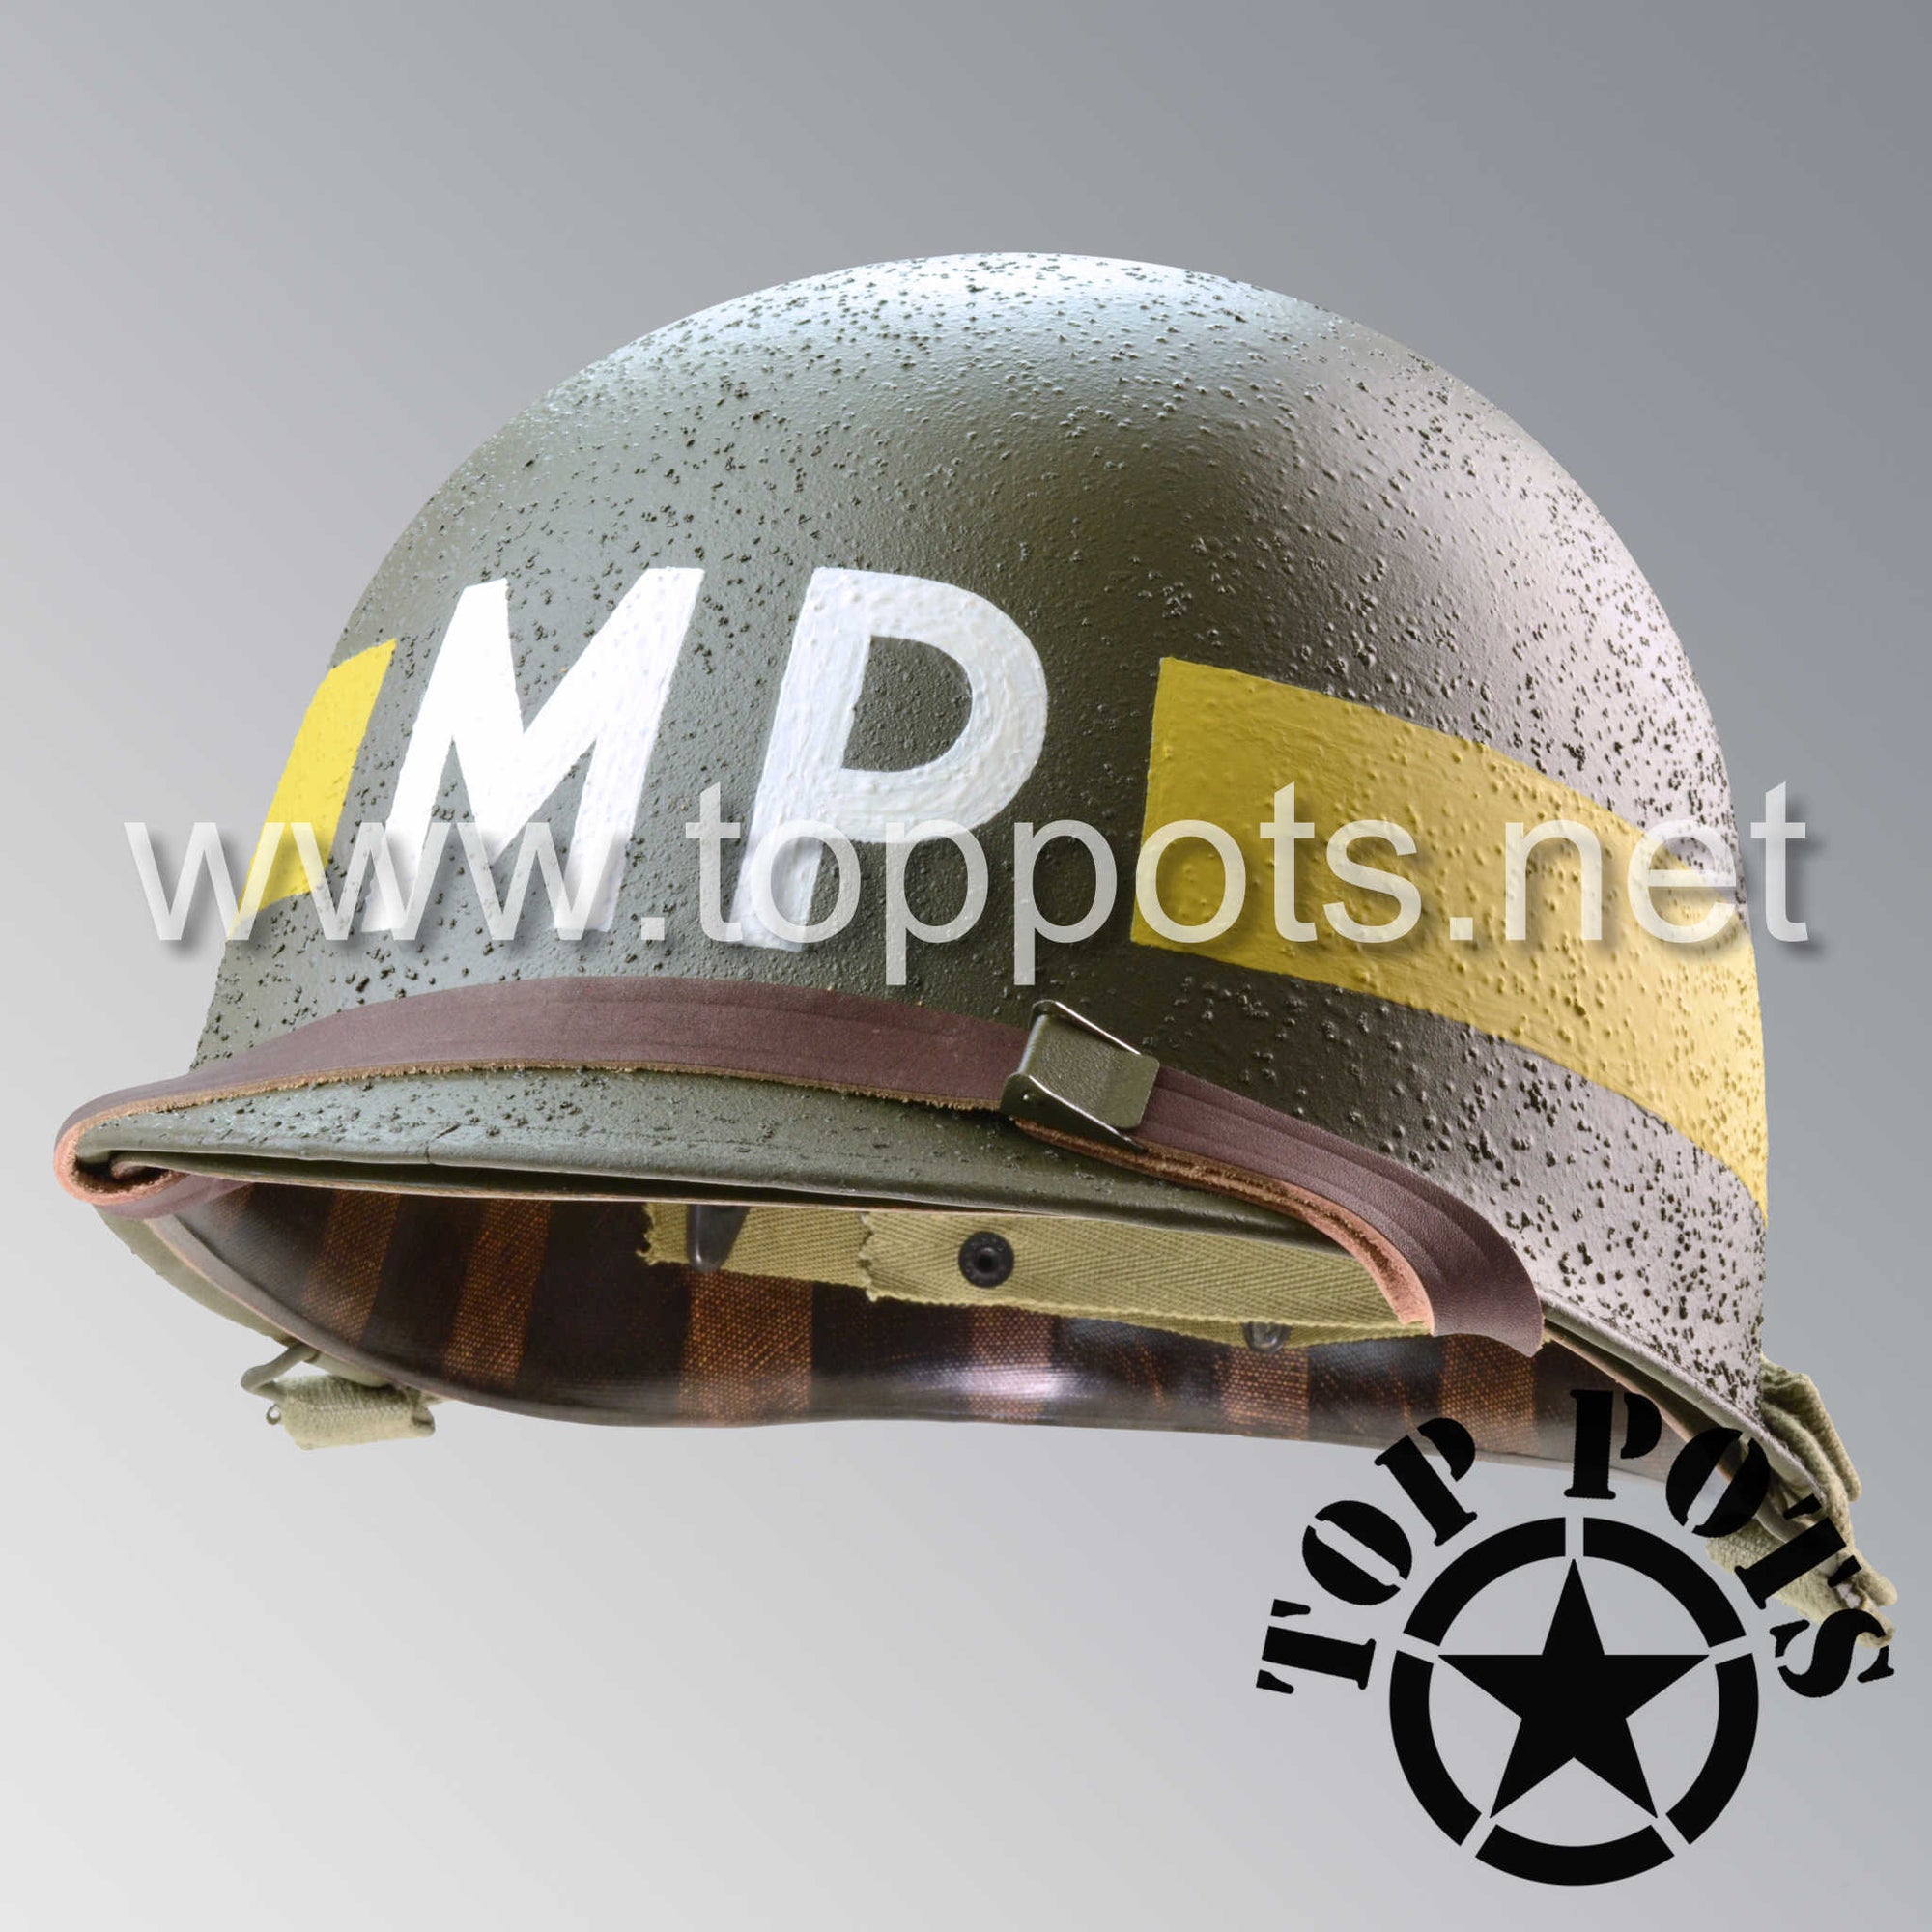 WWII US Army Restored Original M1 Infantry Helmet Swivel Bale Shell and Liner with Yellow Divisional MP Military Police Emblem